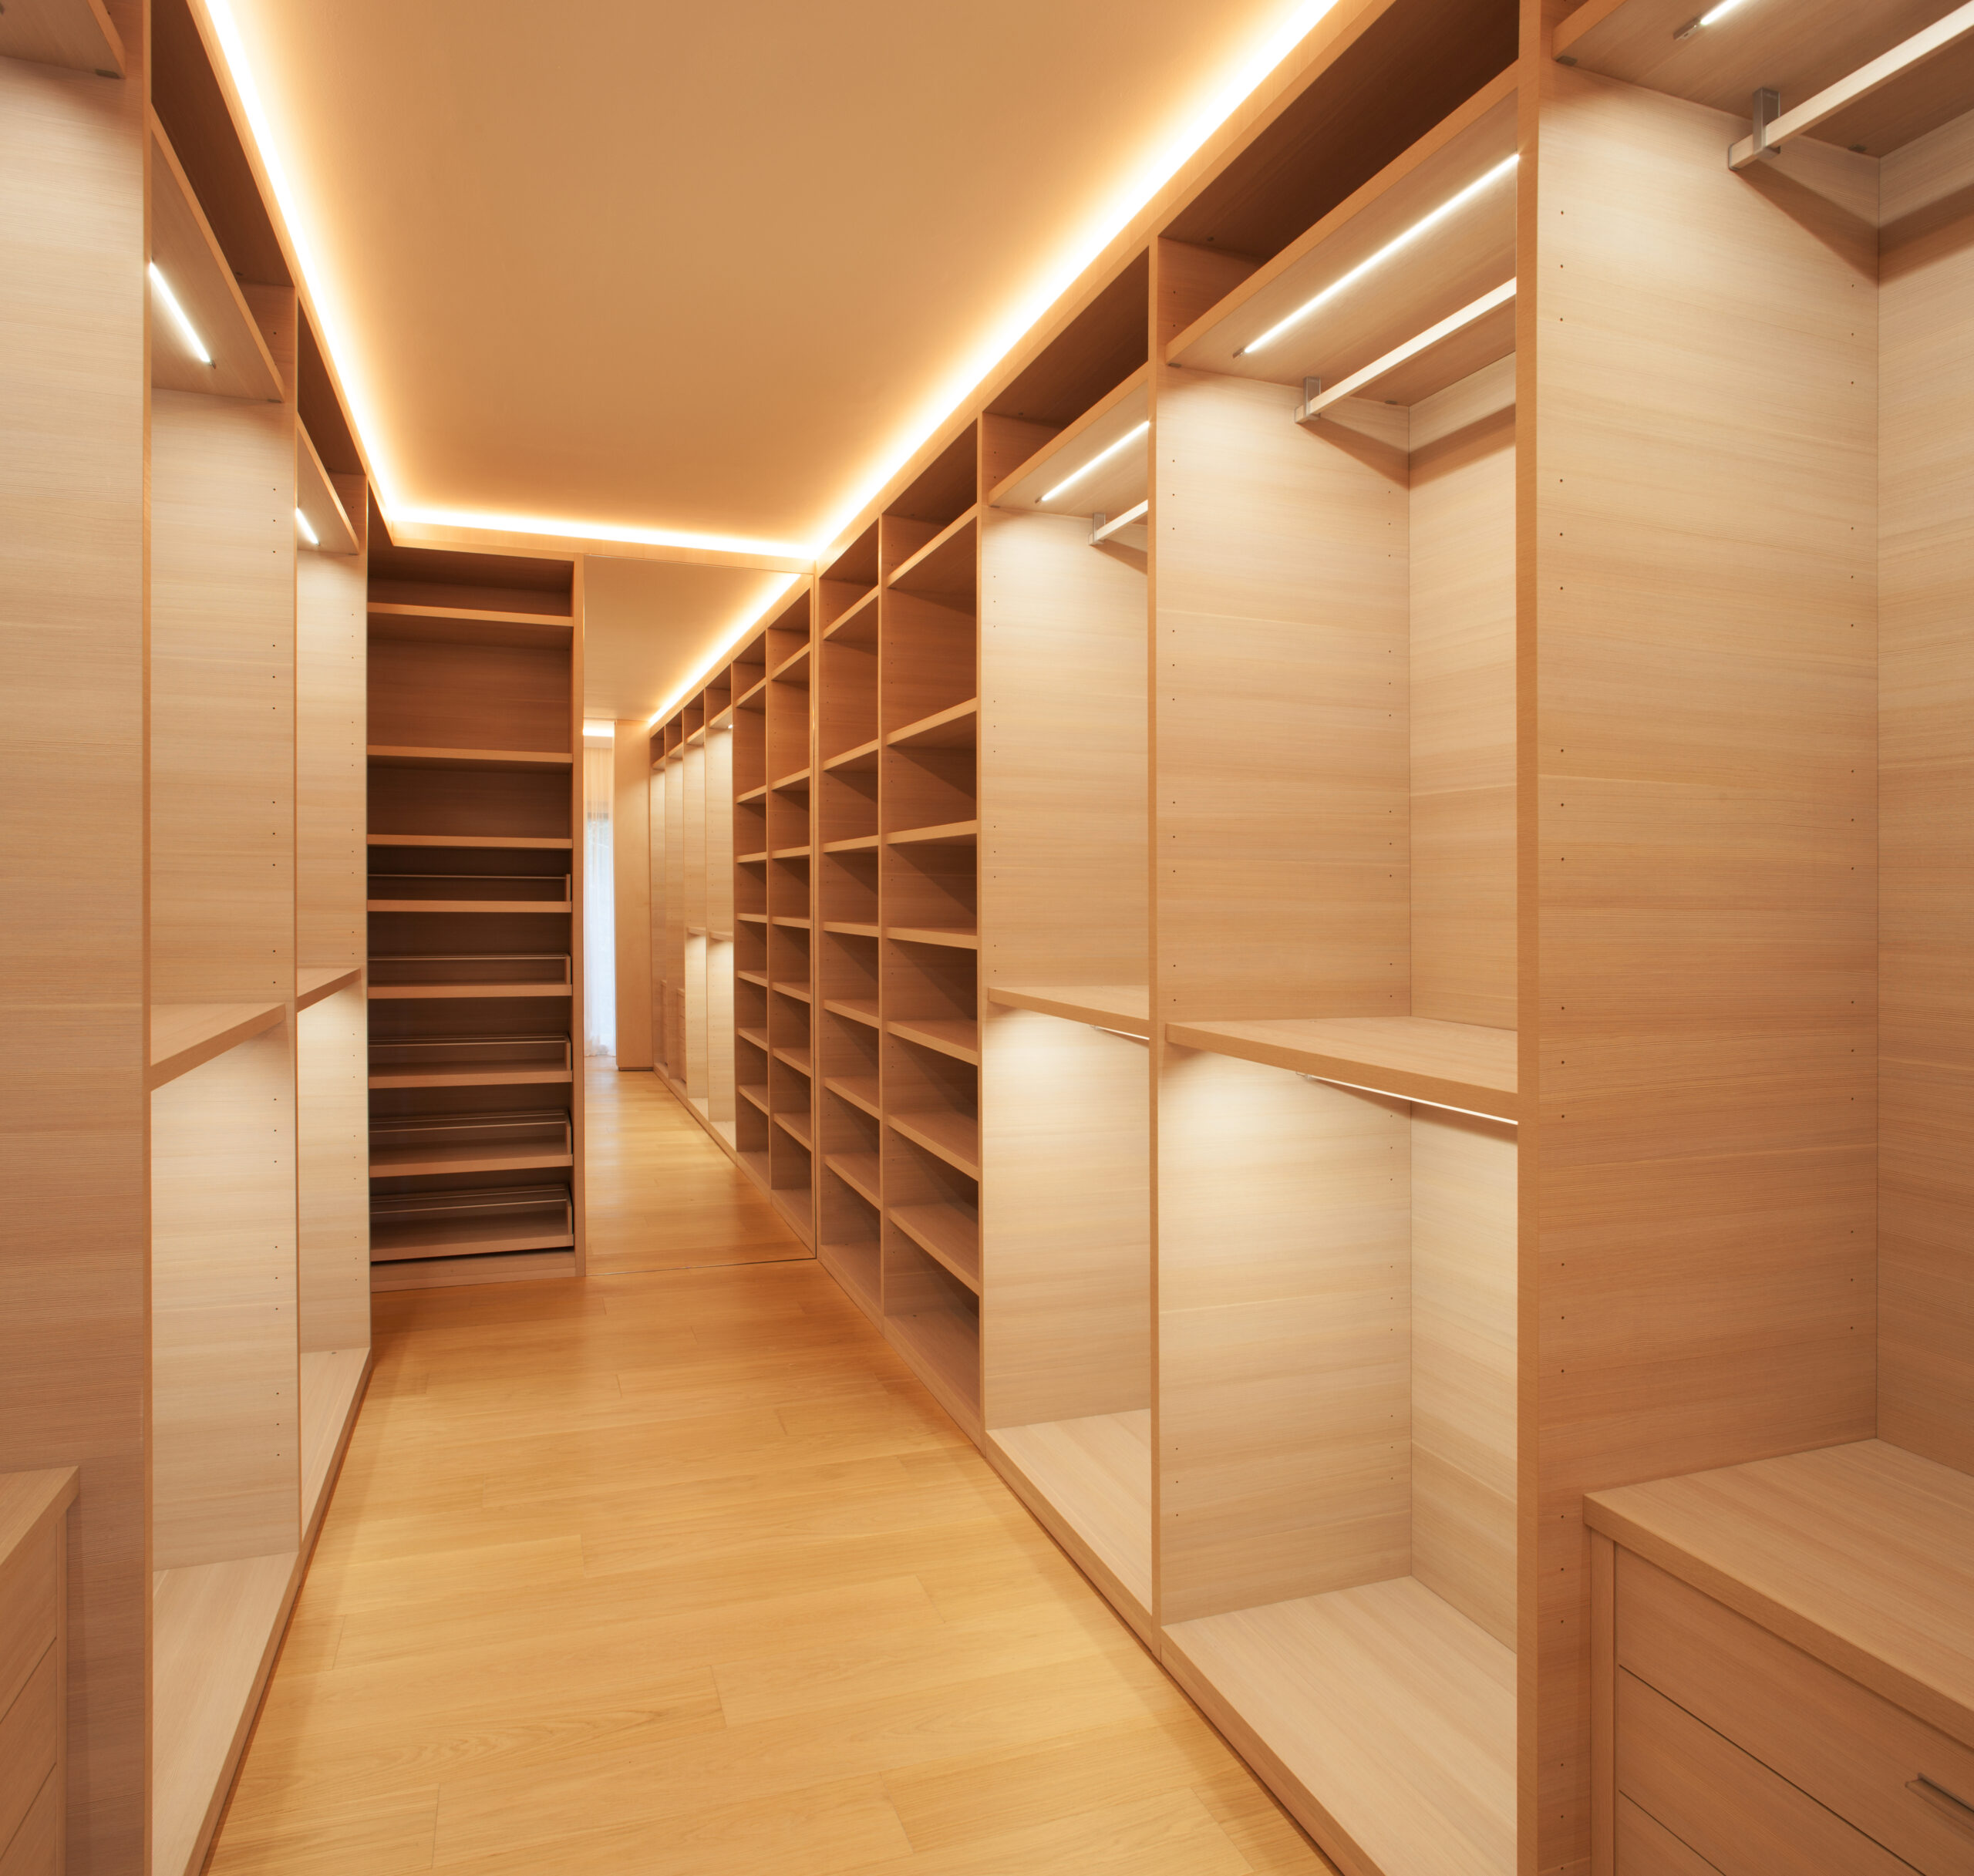 Expansive hallway walk-in closet with rows of sleek open storage, clothes hanging space, pull-out storage, and modern bar lighting in the cabinetry